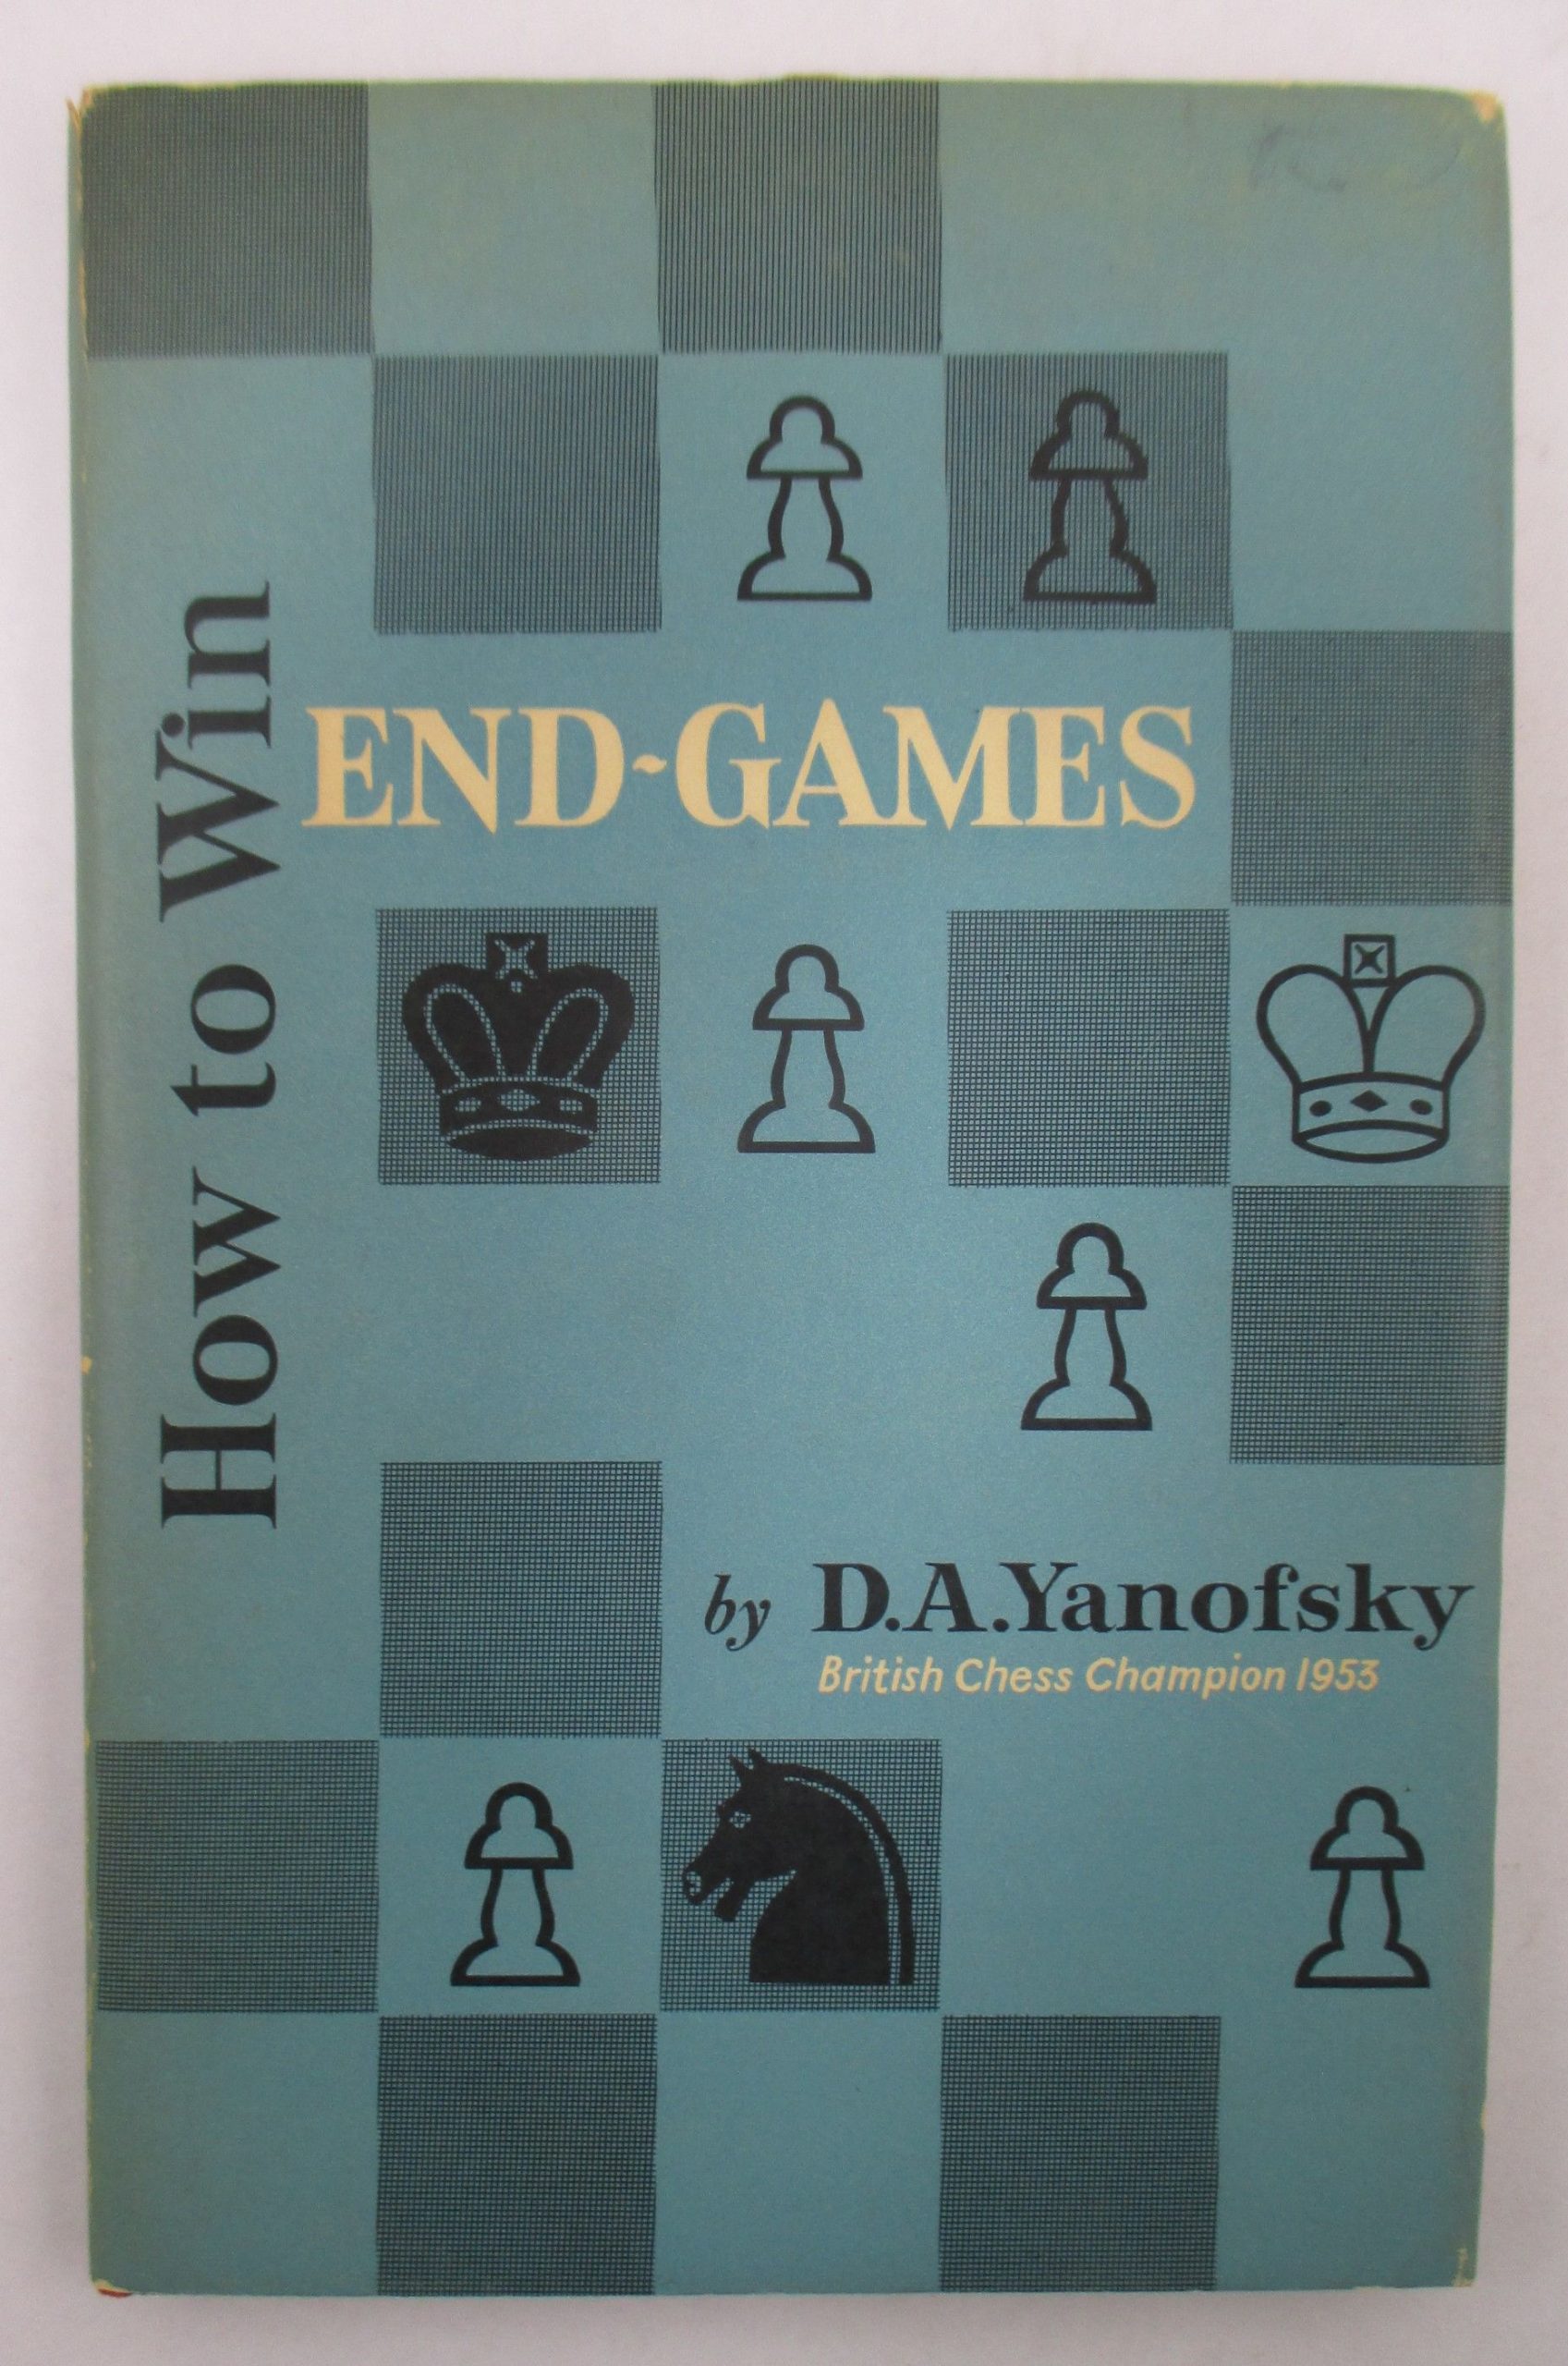 How to Win End Games, D.A. Yanofsky, Sir Isaac Pitman and Sons Ltd., 1957